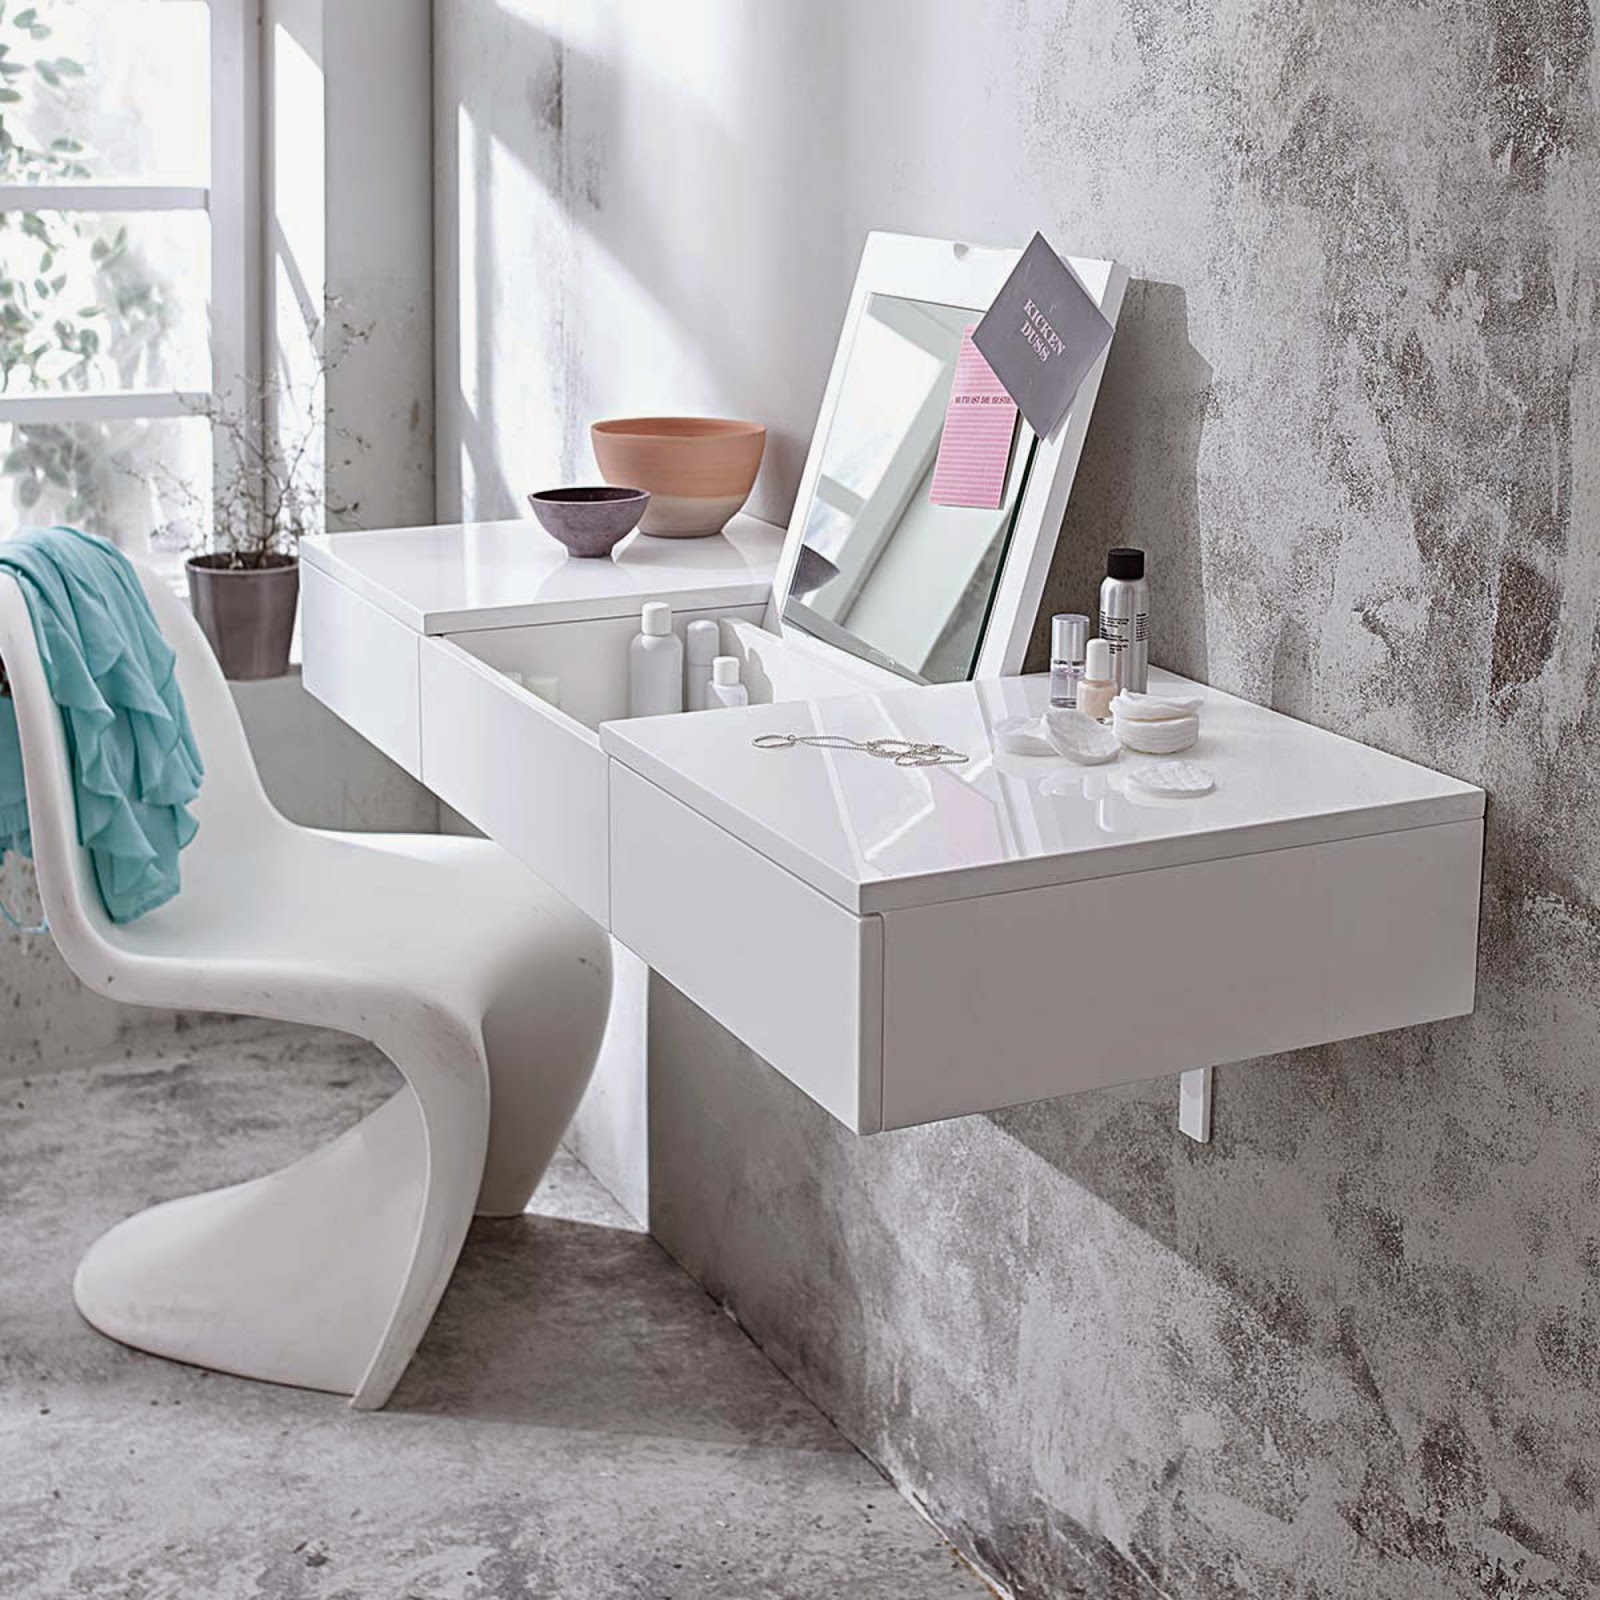 wall mounted modern white dressing table ideas with folding mirror